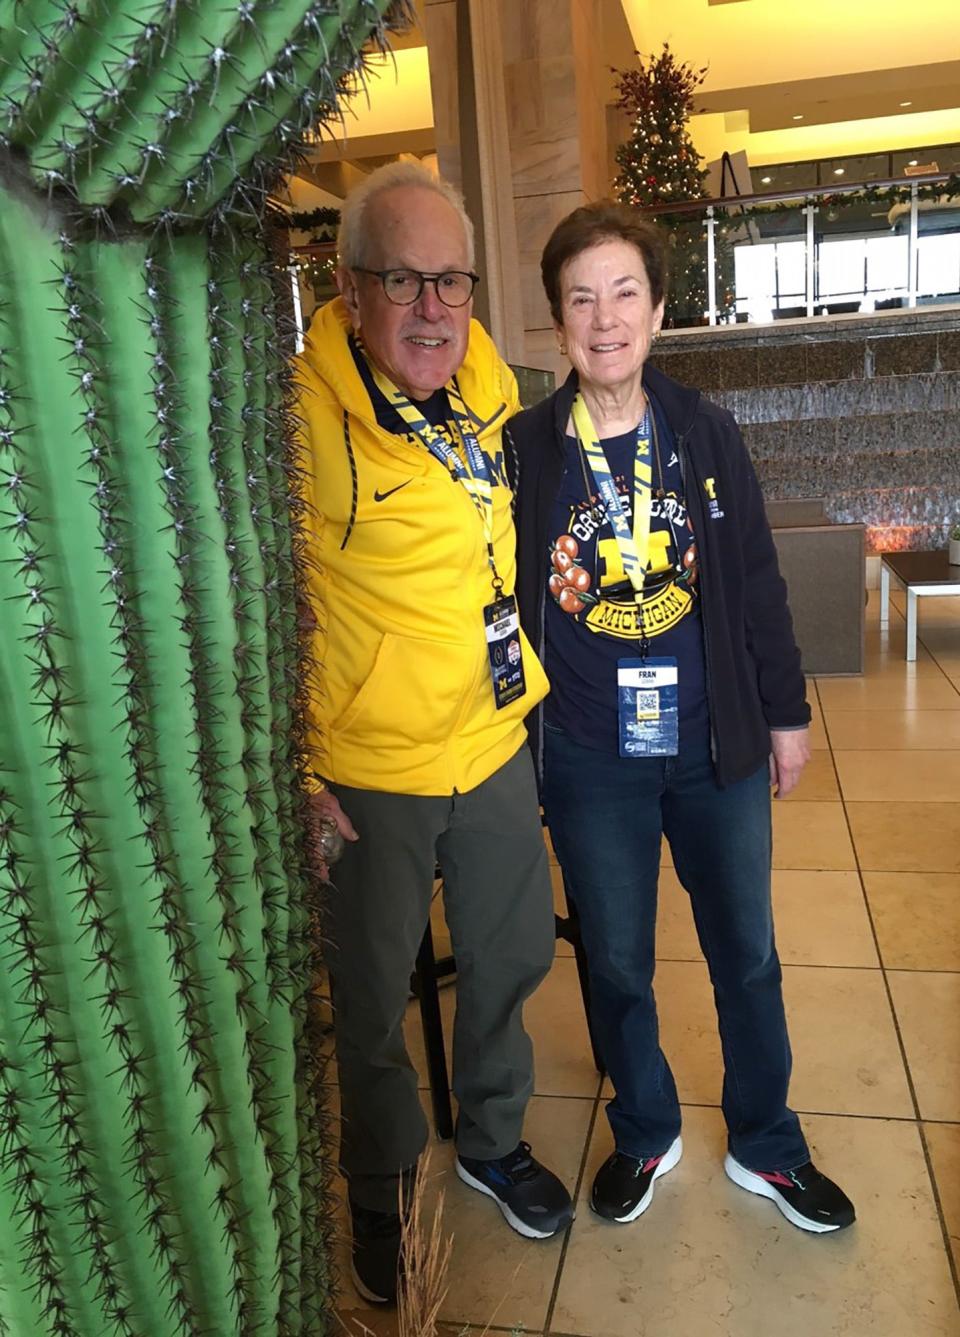 Michael and Fran Goran of Bloomfield Hills will attend Saturday's Fiesta Bowl as part of an alumni association trip. She says she has been so impressed by some of the people they've met that it has brought her to tears.